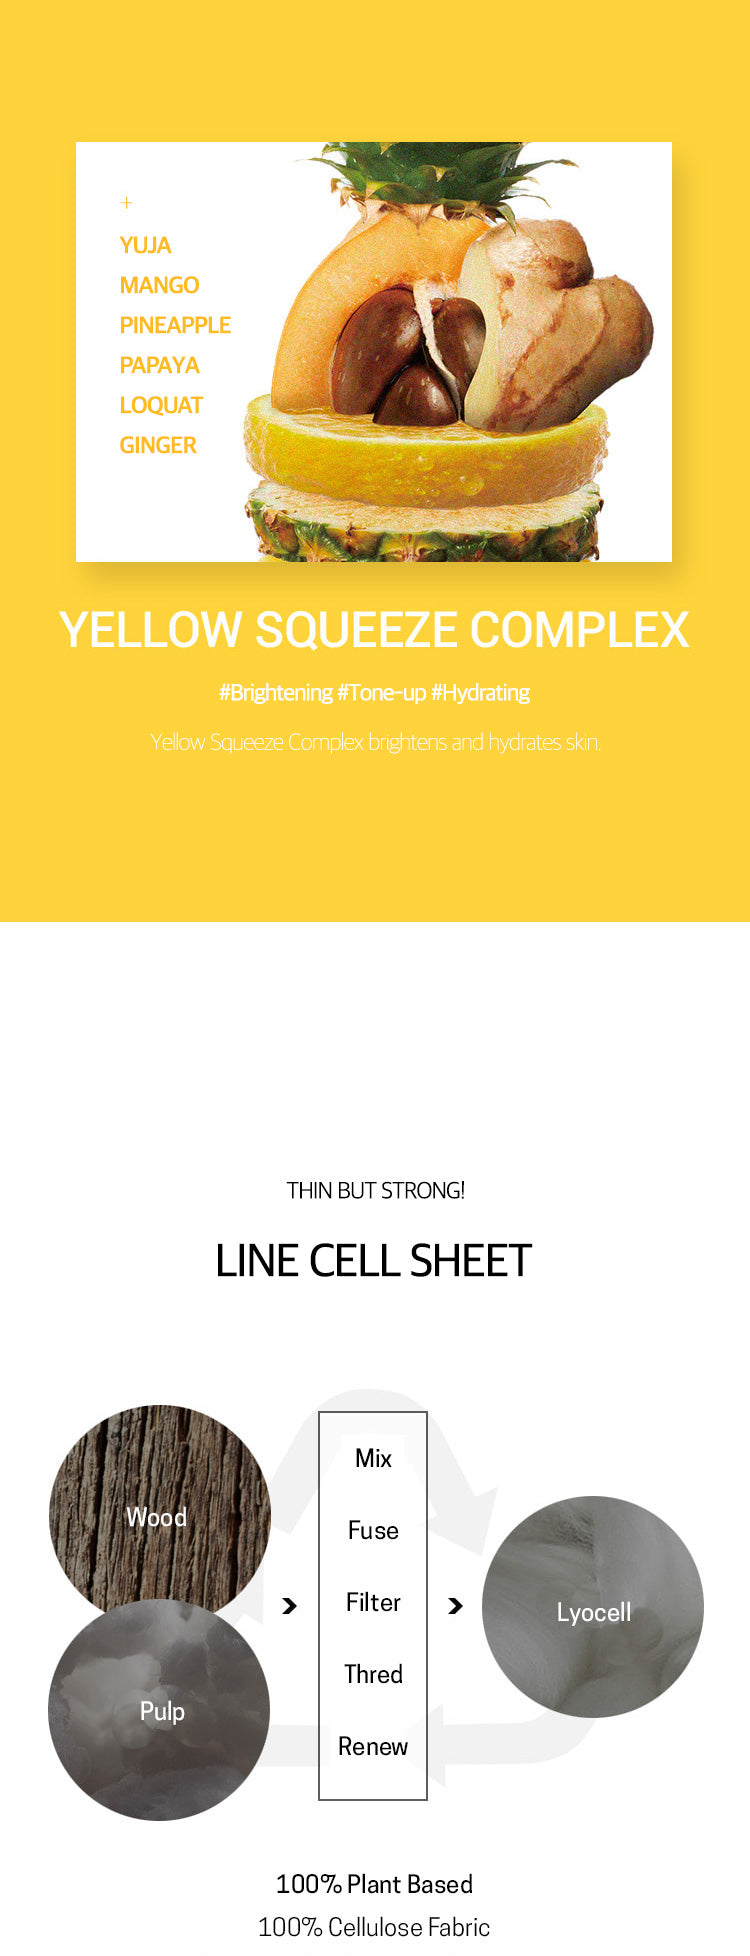 yellowsqueeze-3